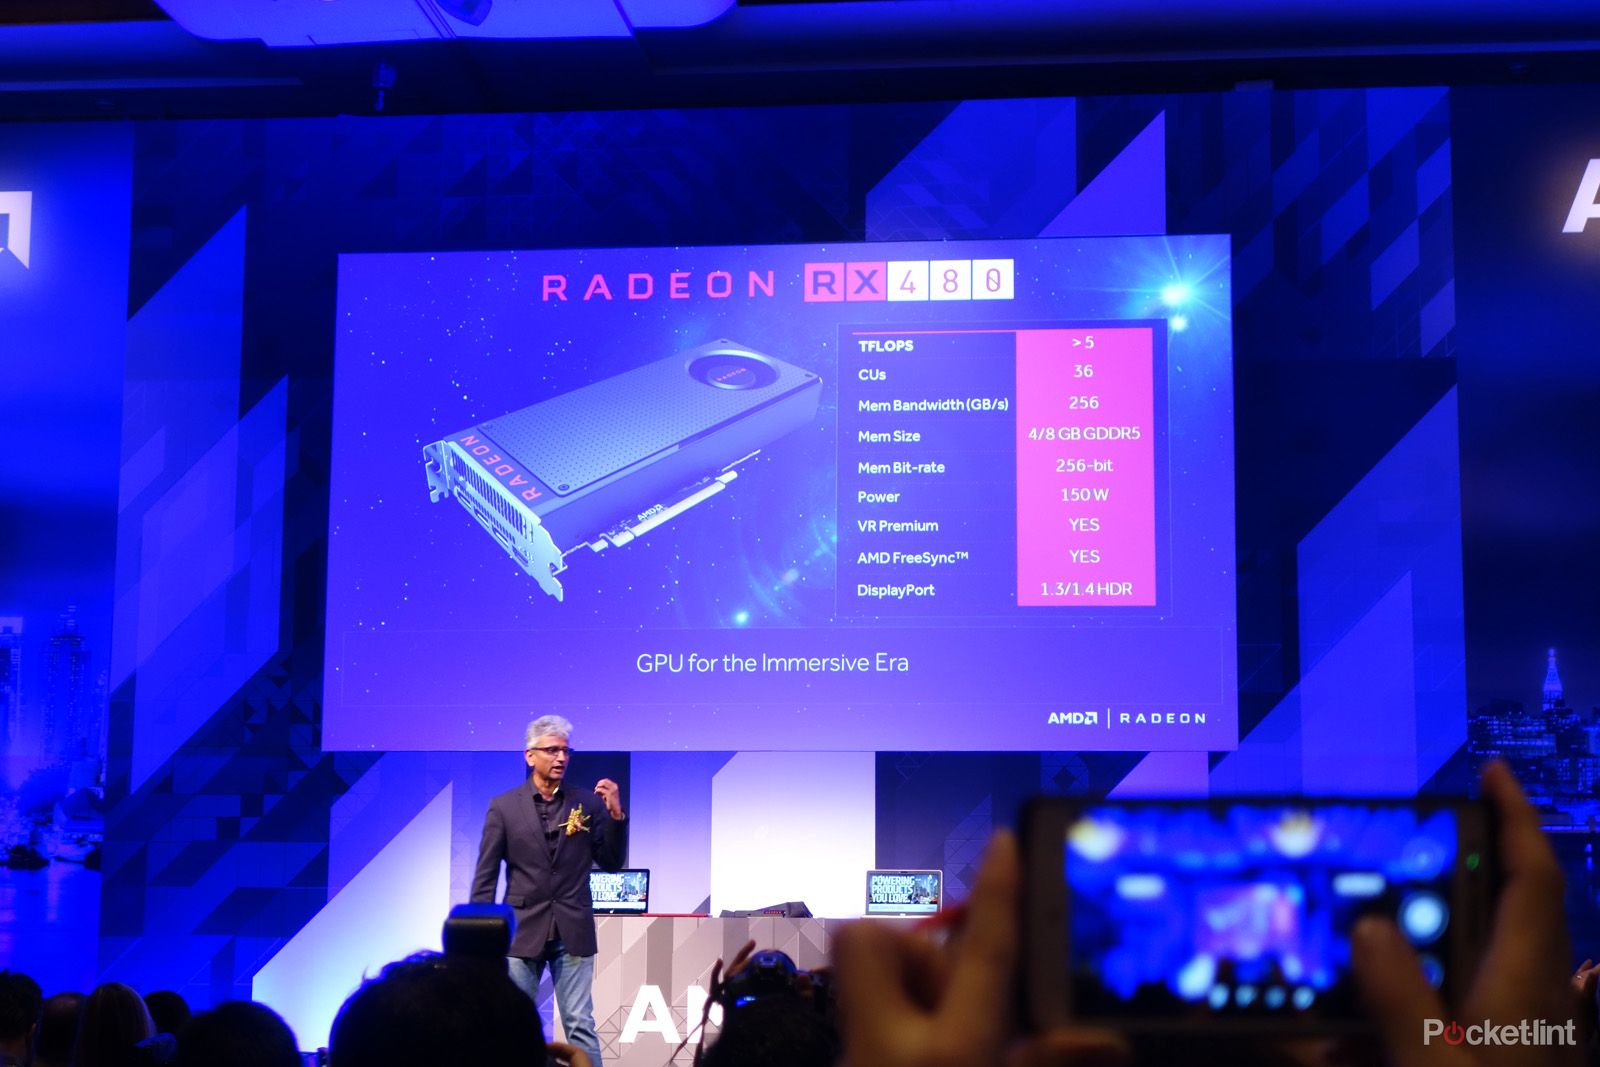 amd radeon rx 480 graphics card makes vr much more affordable image 2